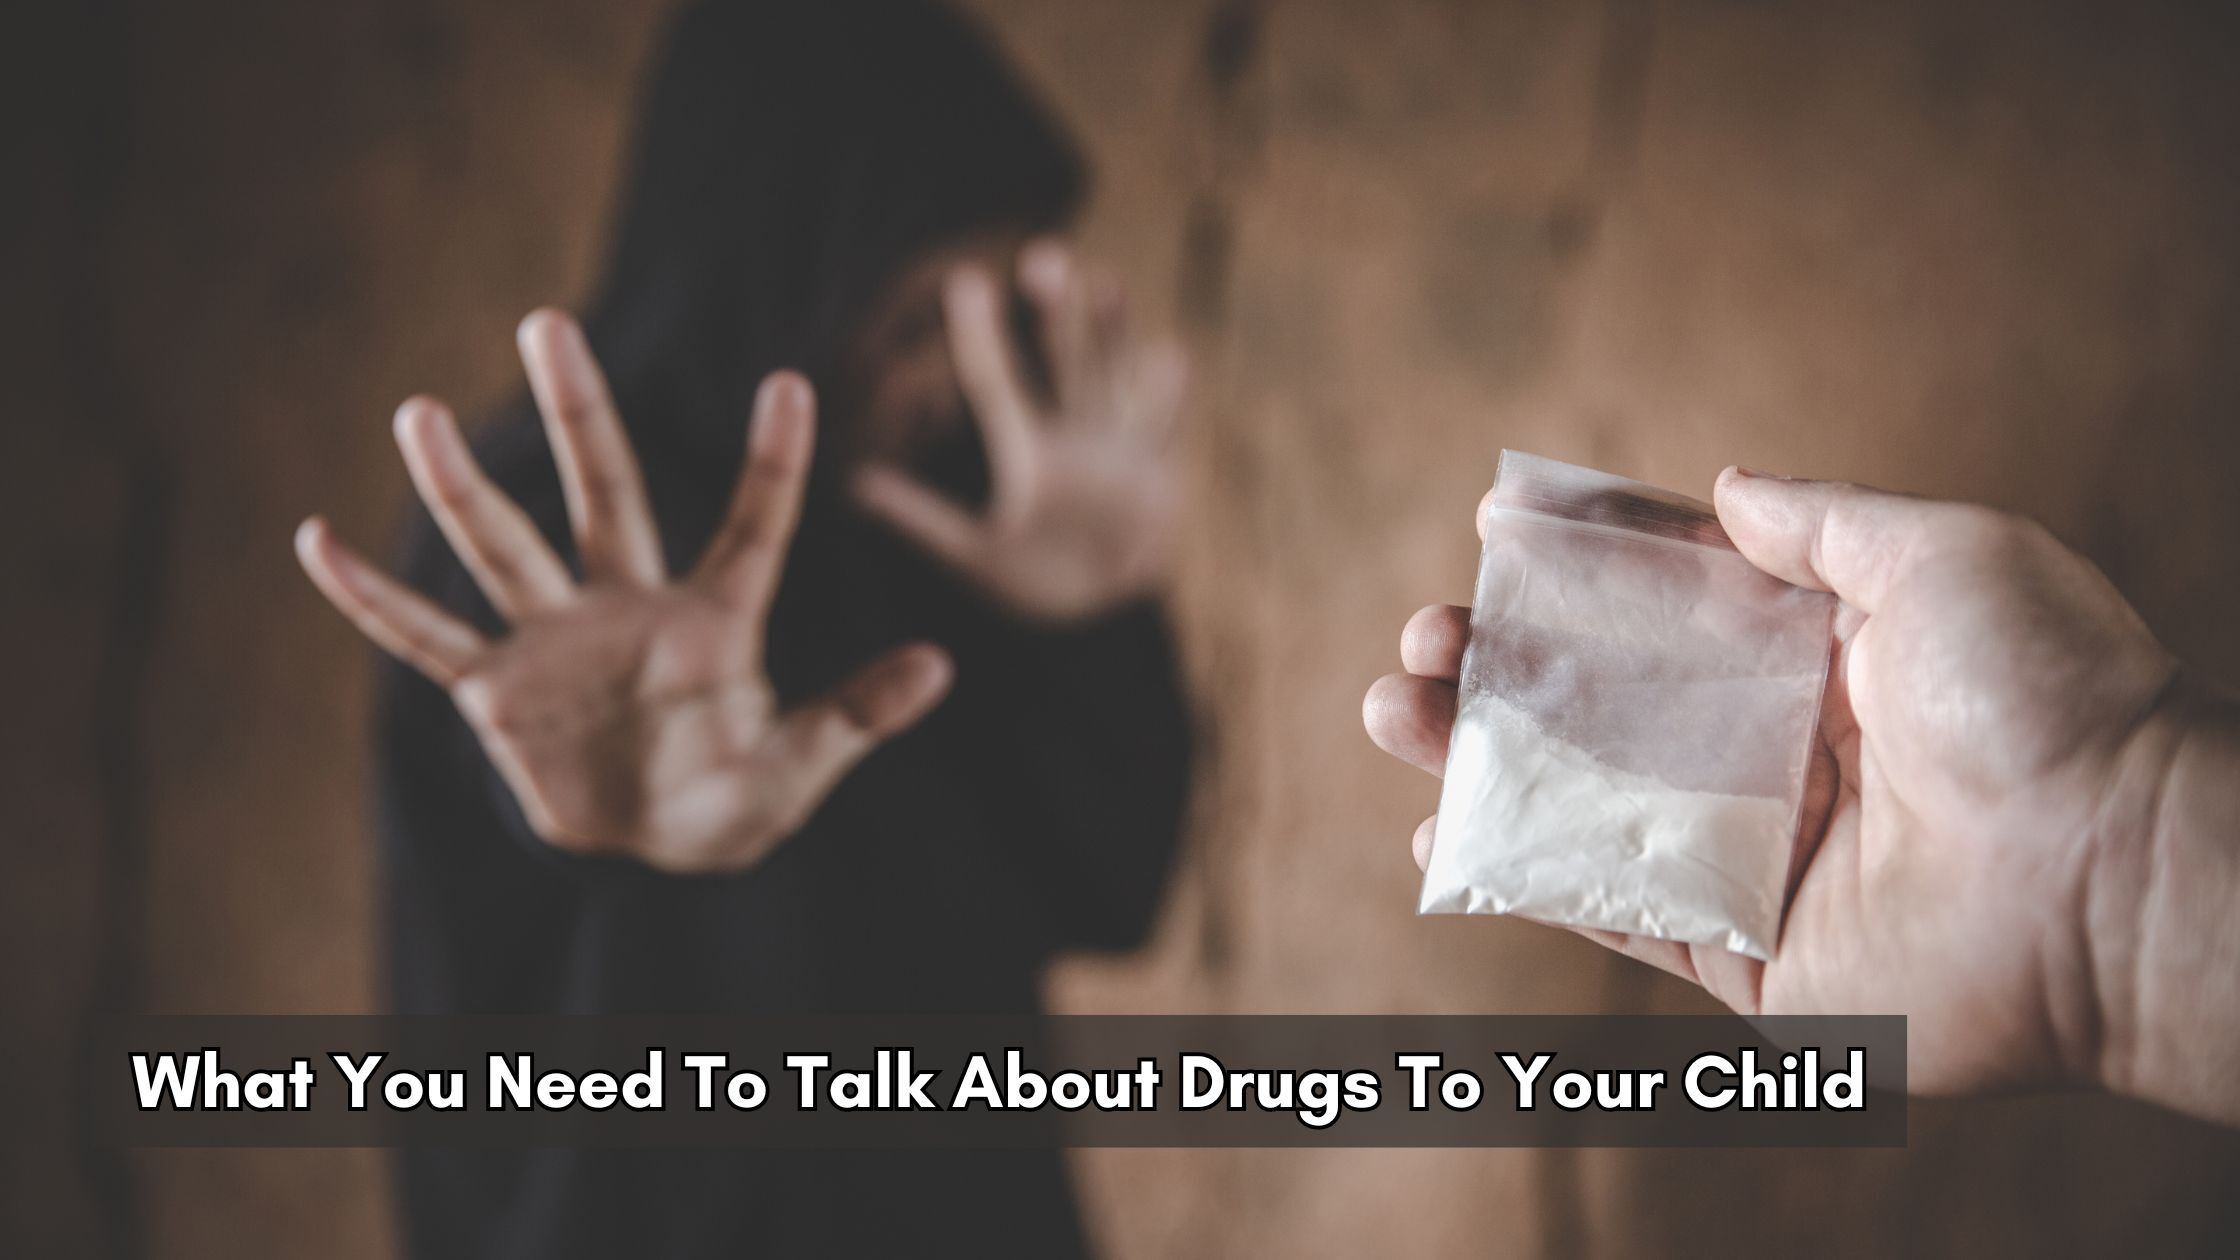 What You Need To Talk About Drugs To Your Child